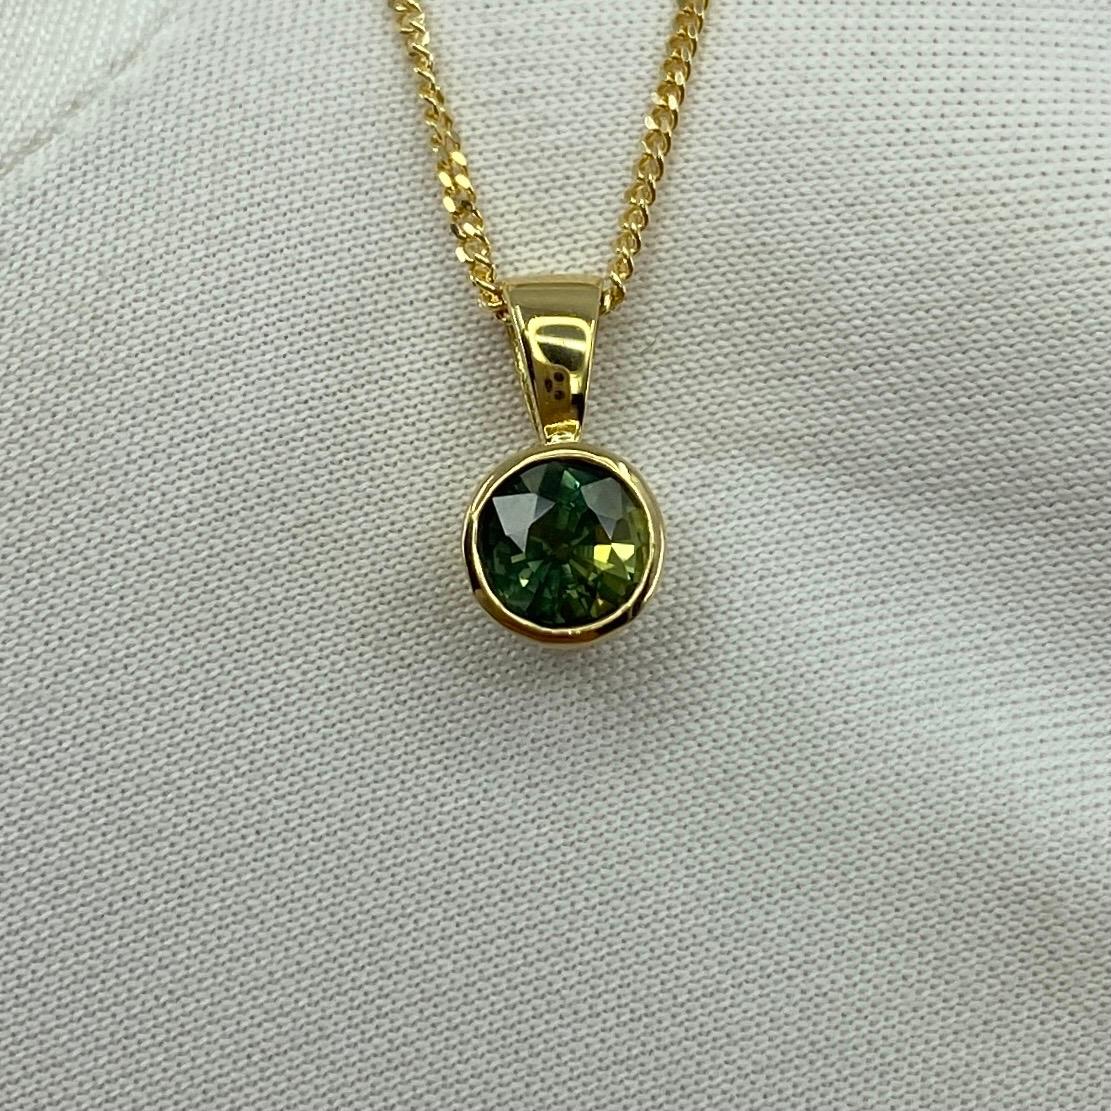 Fine Bi Colour Green Yellow Untreated Australian Sapphire 18k Yellow Gold Pendant Necklace.

0.56 Carat round cut sapphire with a stunning vivid green yellow bi colour effect and excellent clarity. Very clean stone.

This sapphire also has an